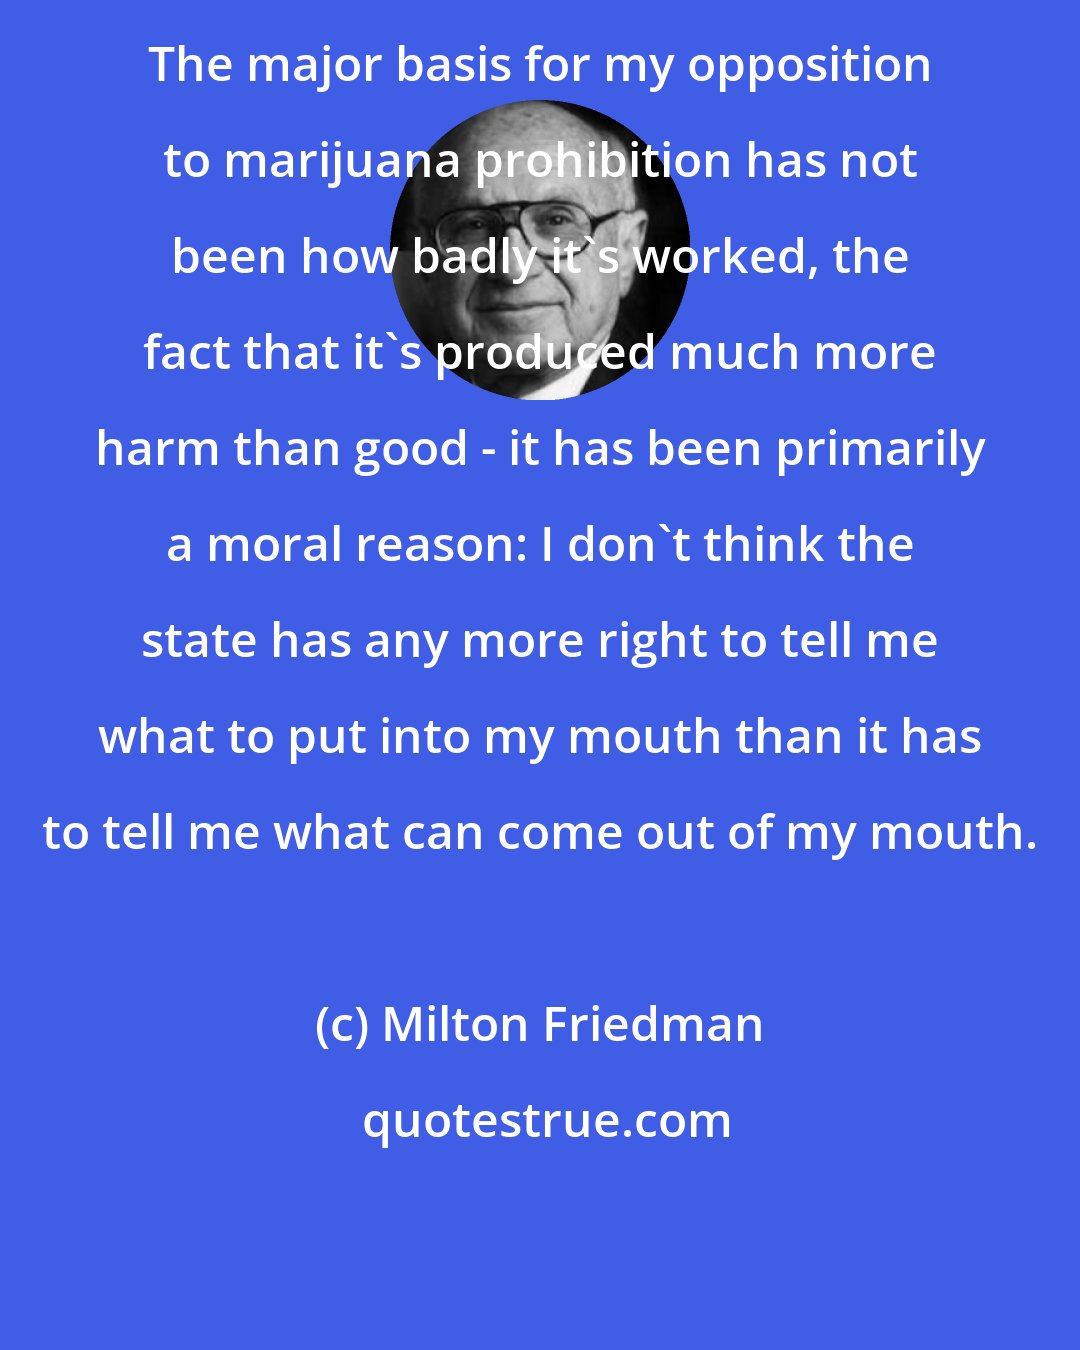 Milton Friedman: The major basis for my opposition to marijuana prohibition has not been how badly it's worked, the fact that it's produced much more harm than good - it has been primarily a moral reason: I don't think the state has any more right to tell me what to put into my mouth than it has to tell me what can come out of my mouth.